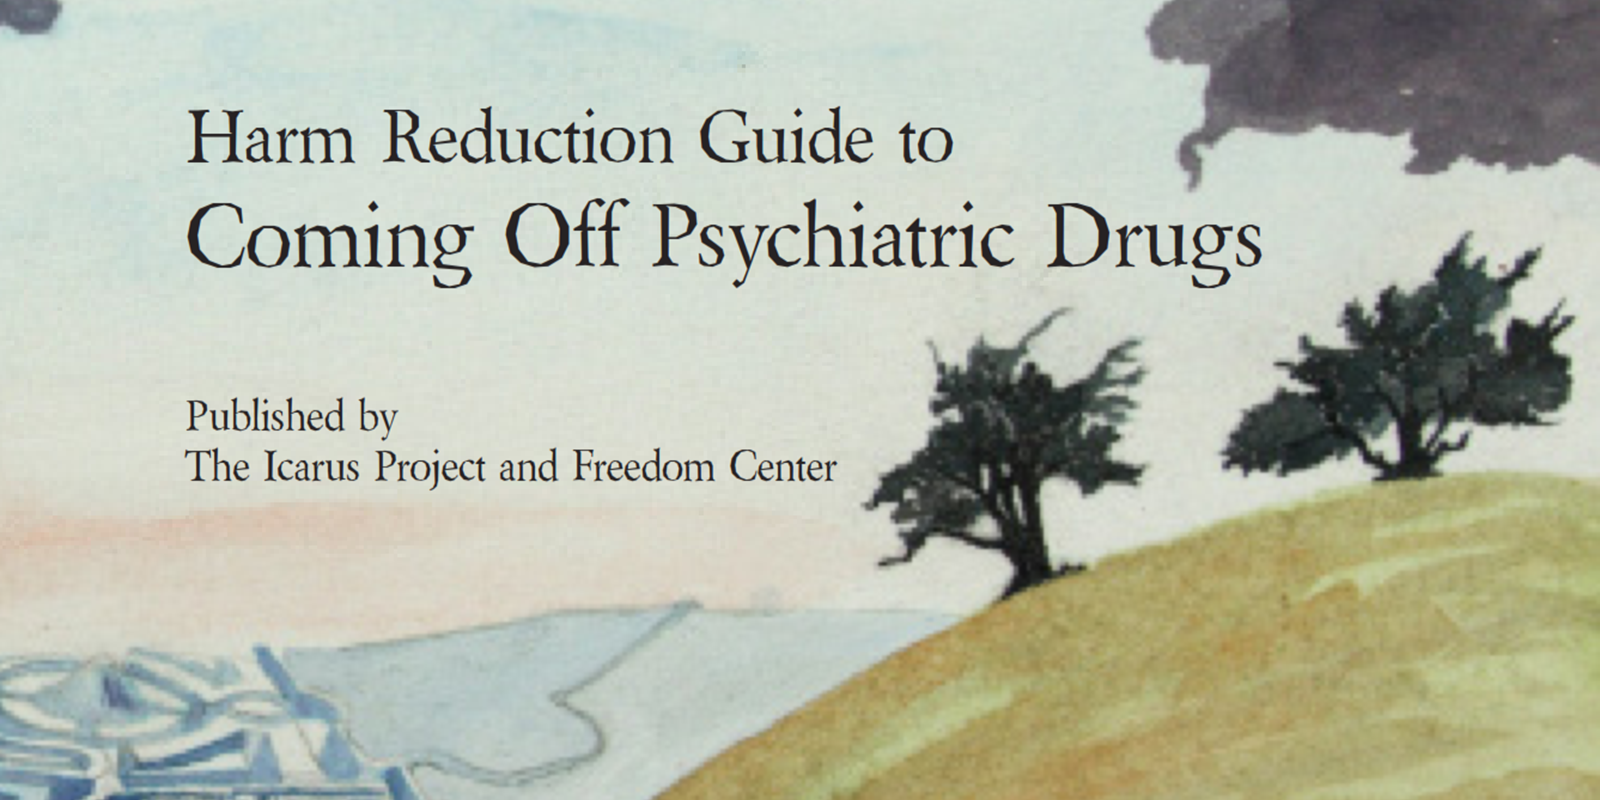 Harm Reduction Guide to Coming Off Psychiatric Drugs